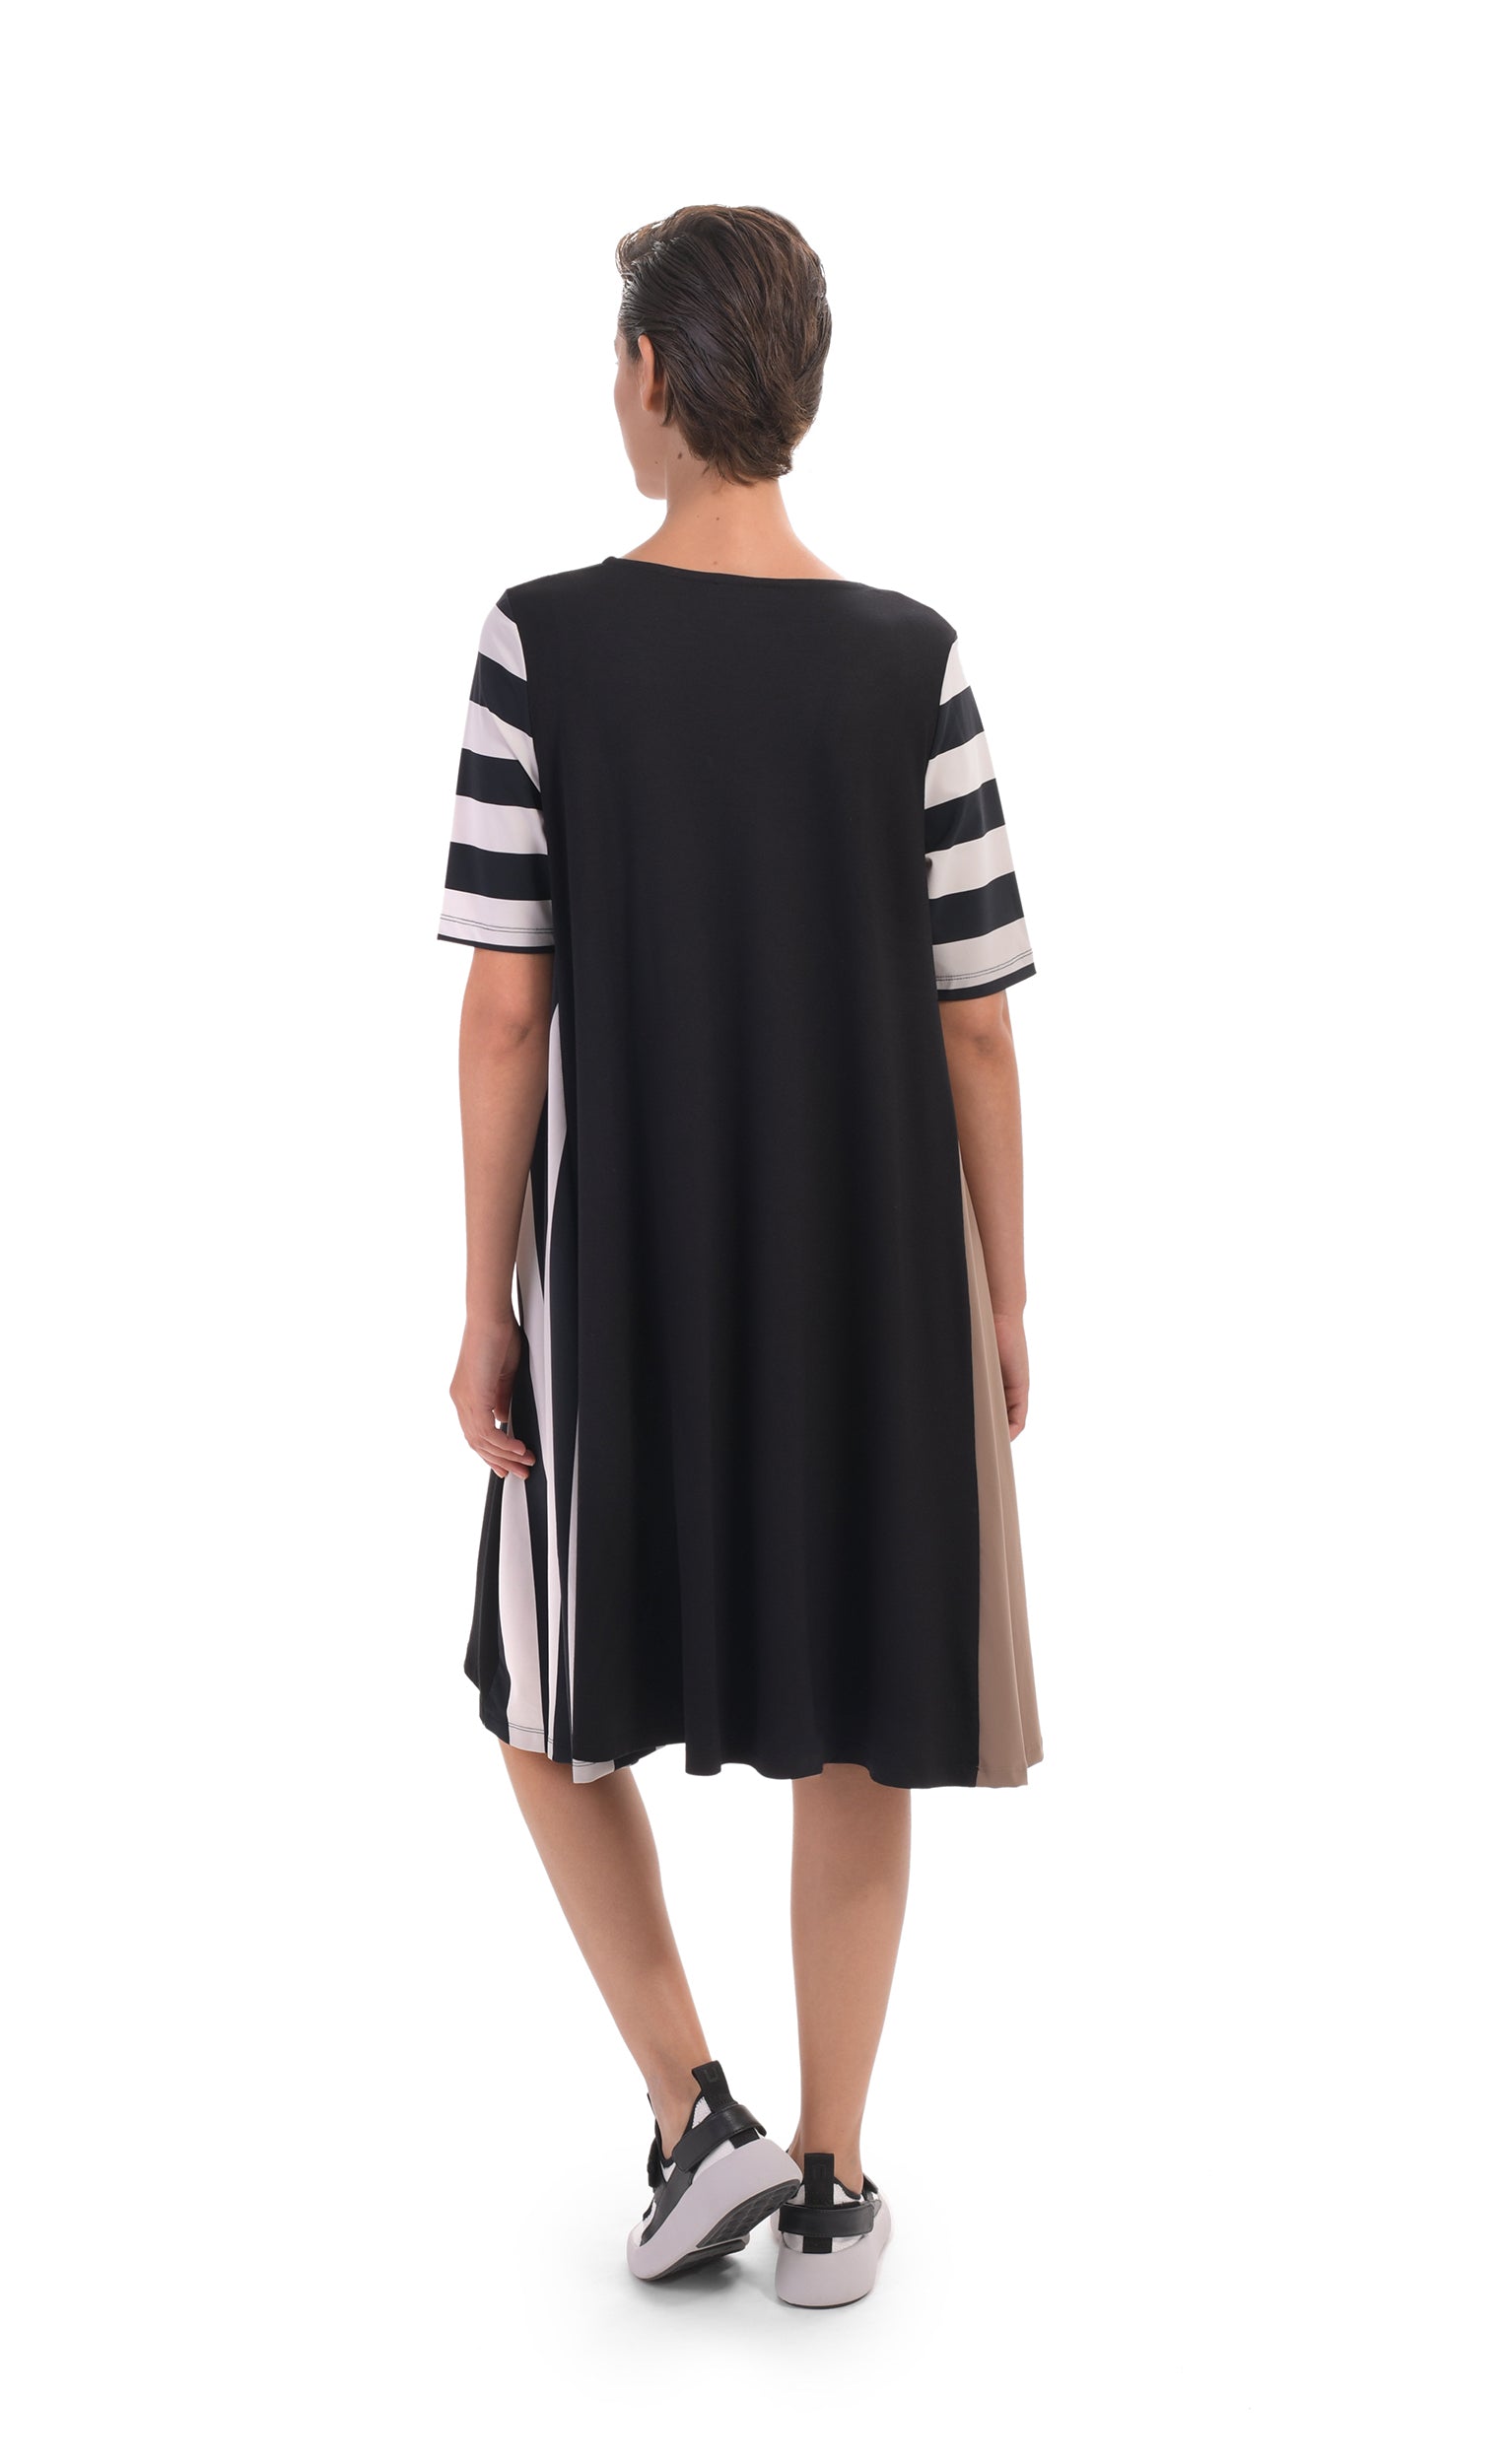 Back, full body view of a woman wearing the alembika tekbika stripe dress. This dress is black with one brown side, one striped side, and striped elbow length sleeves. The dress sits at the knees.